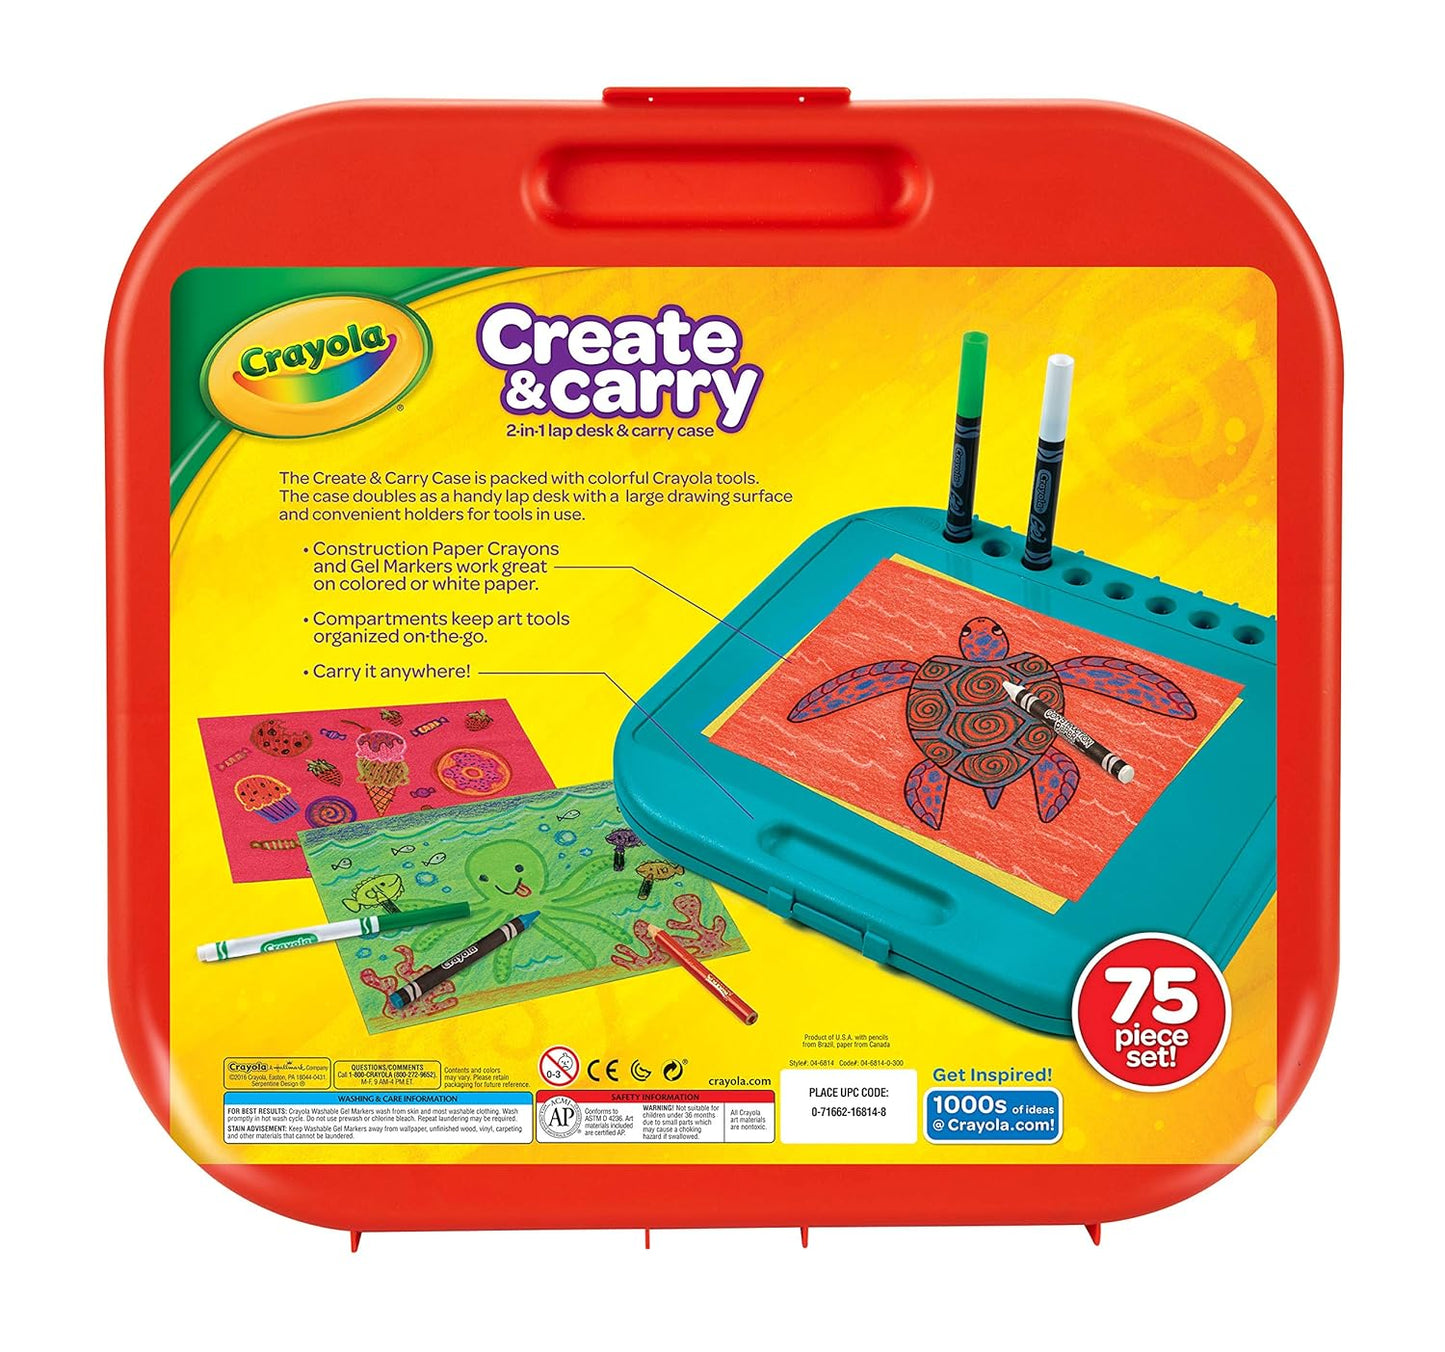 Crayola Create and Carry Case - Pack of 75